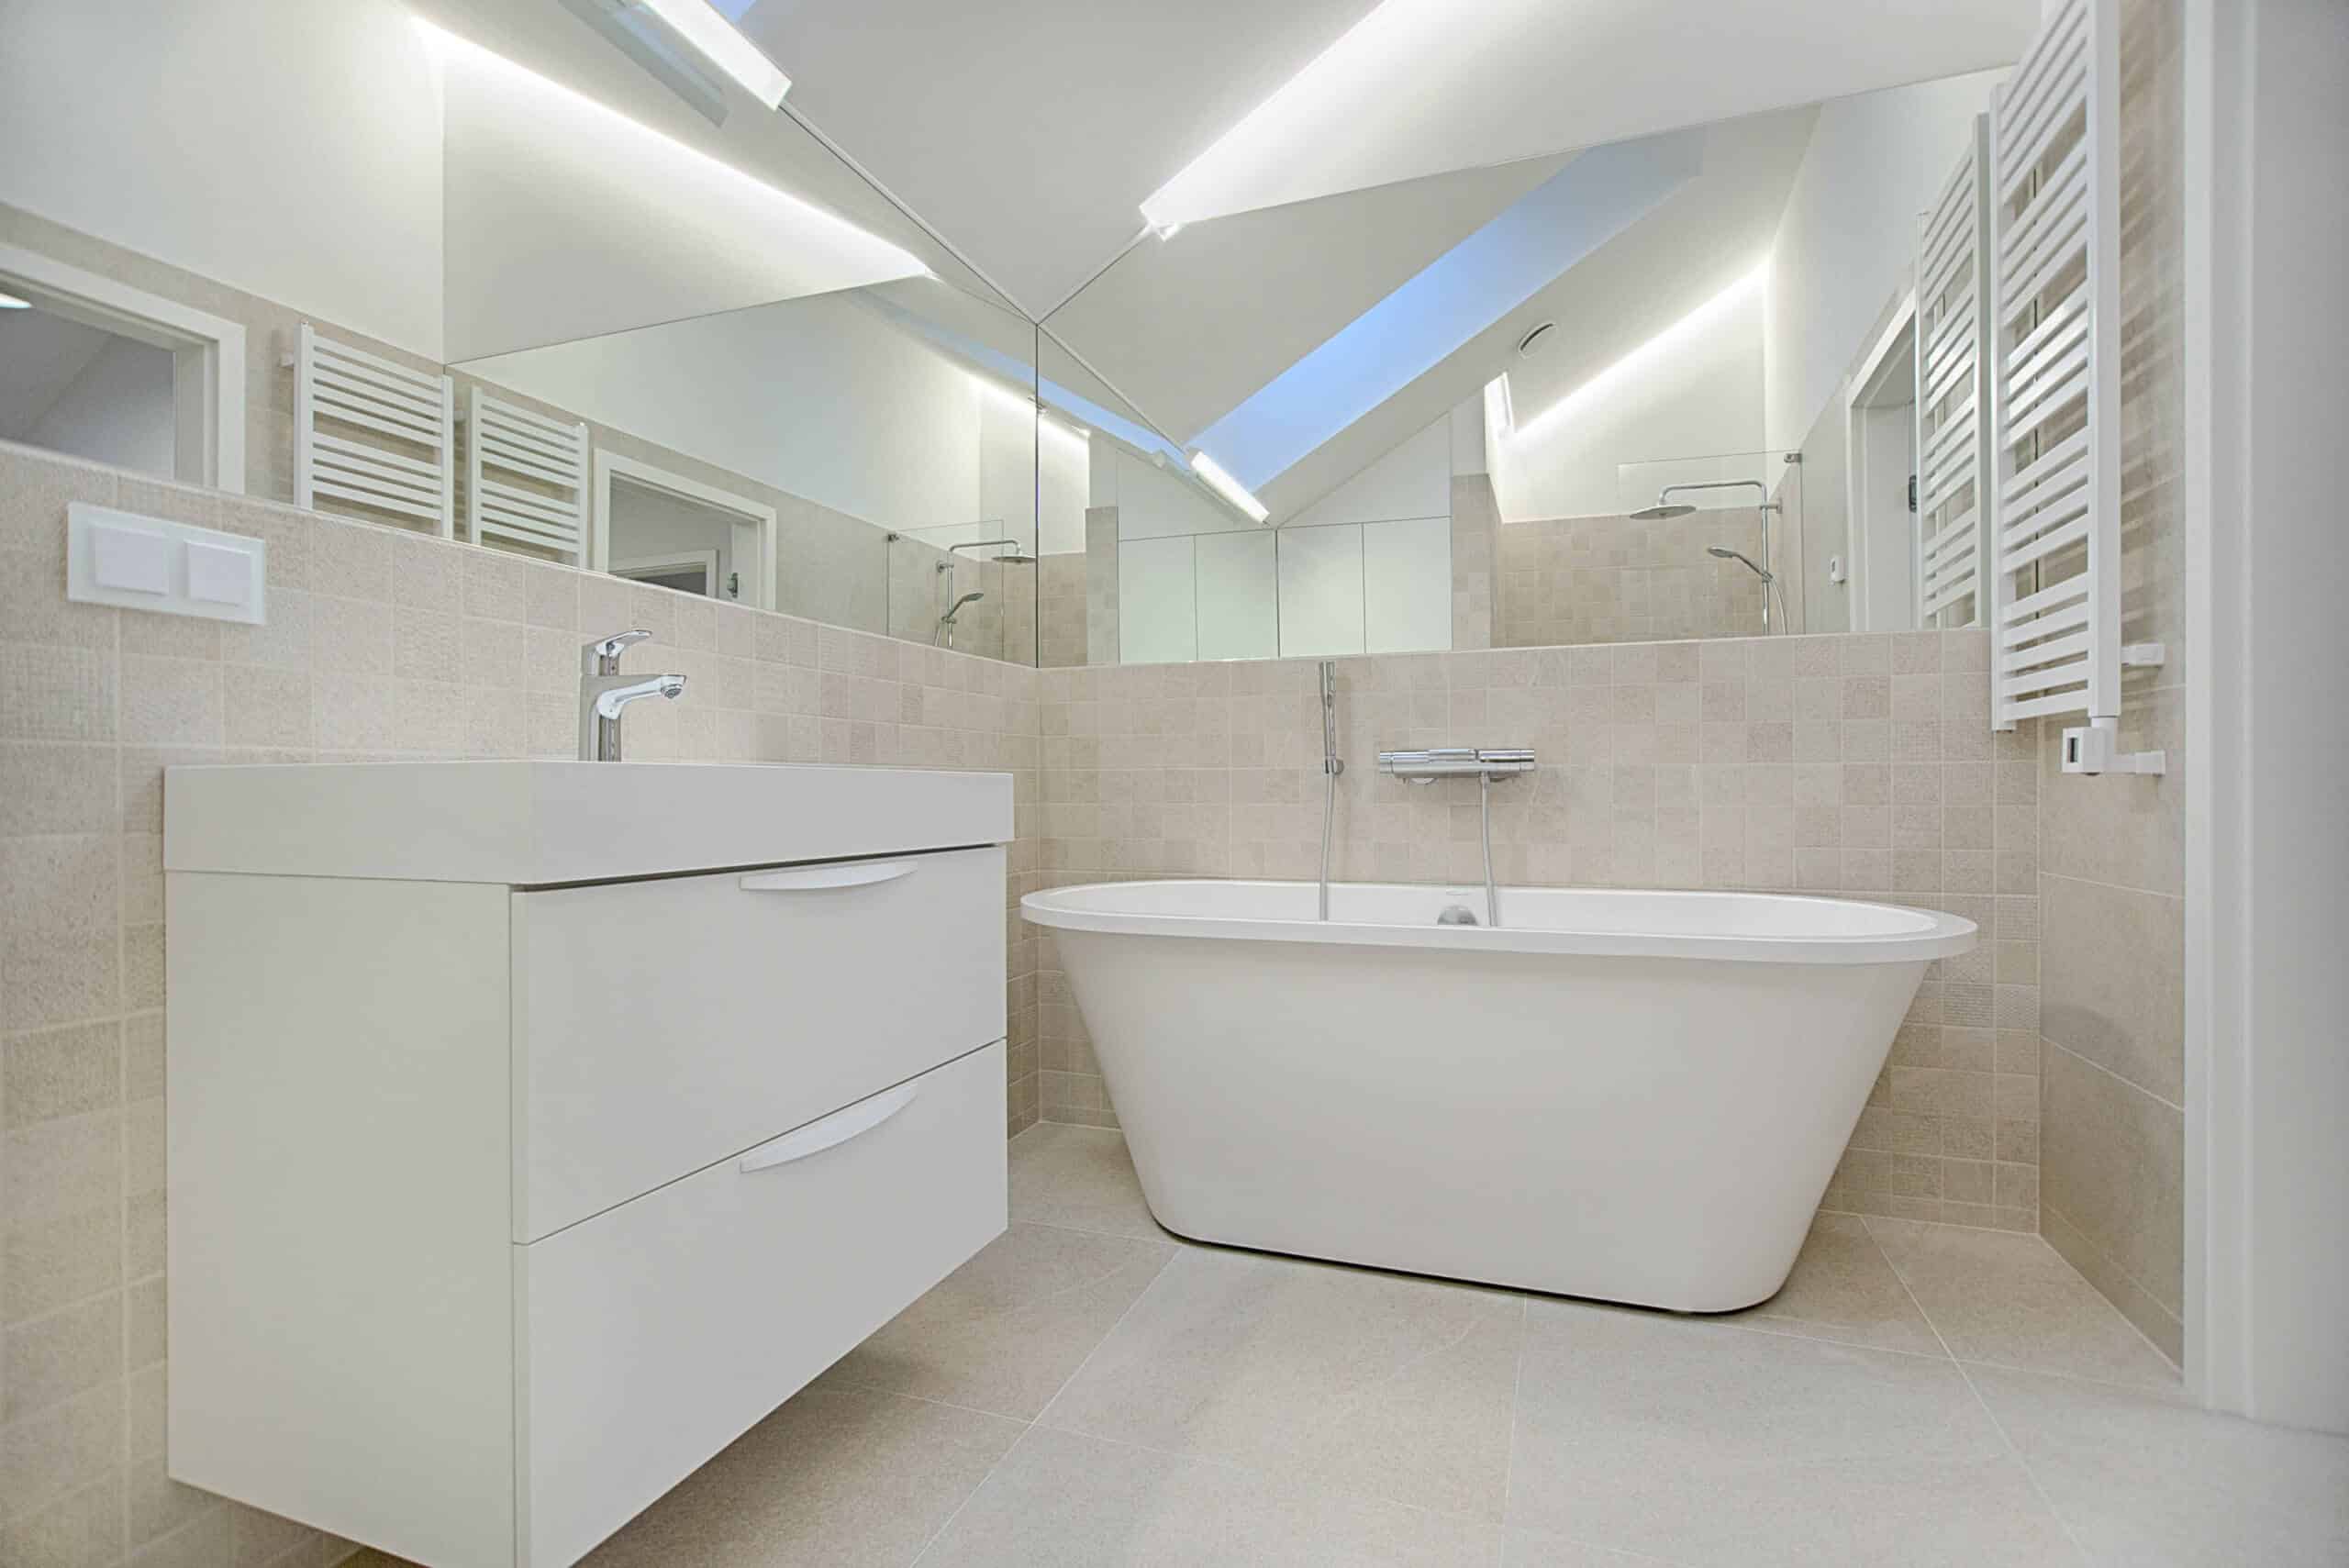 5 Reasons Why Bathroom Renovations Are Worth the Cost